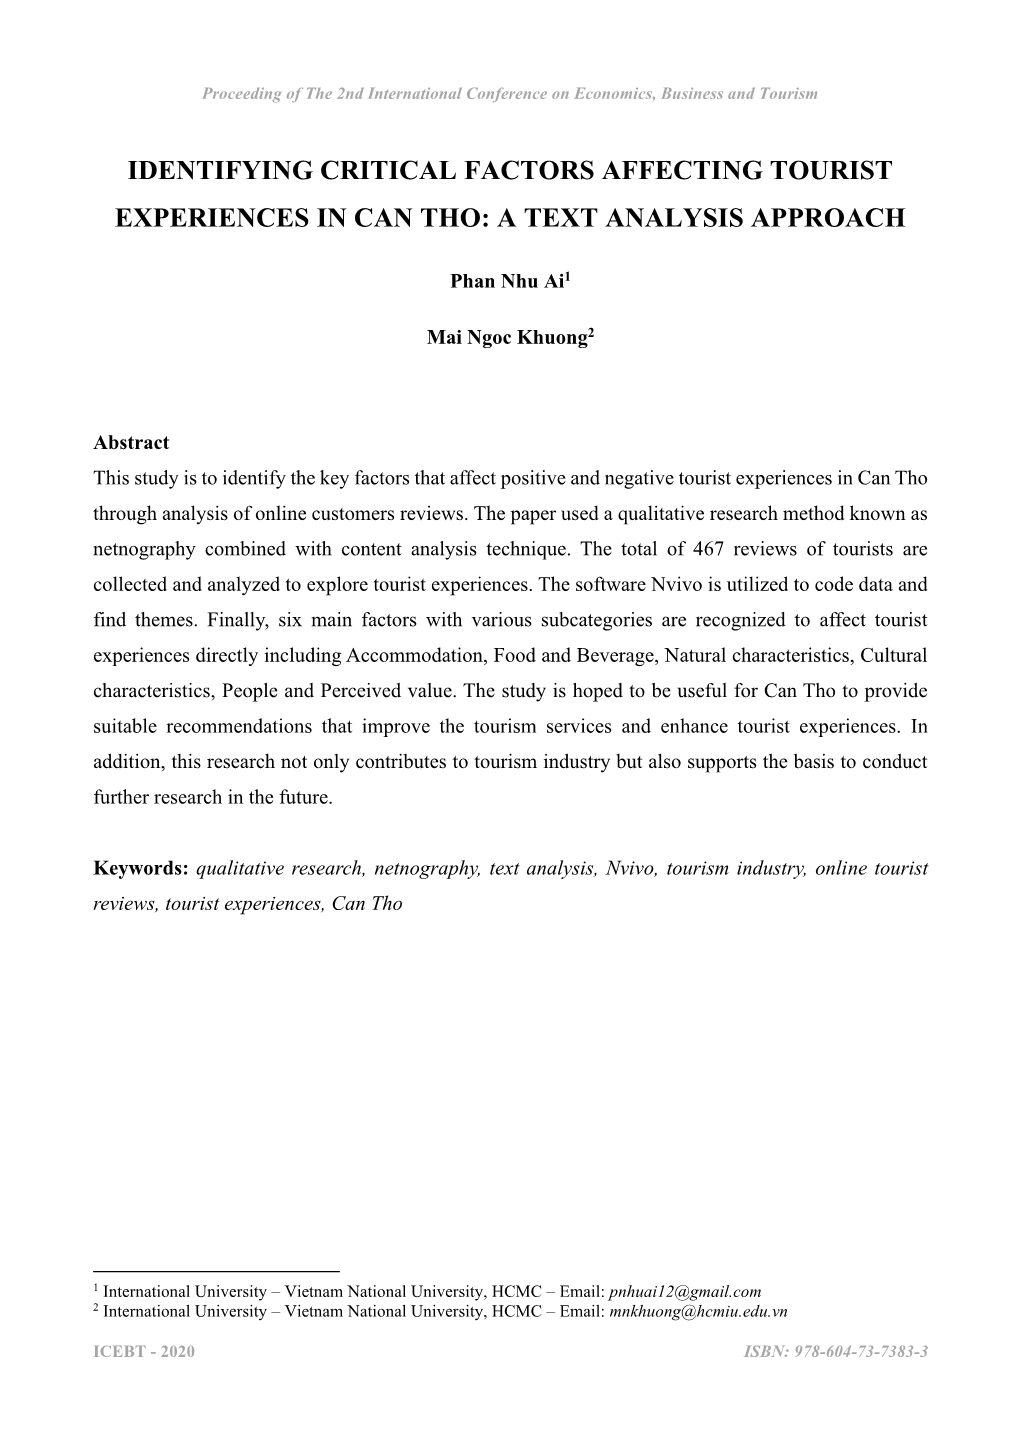 Identifying Critical Factors Affecting Tourist Experiences in Can Tho: a Text Analysis Approach